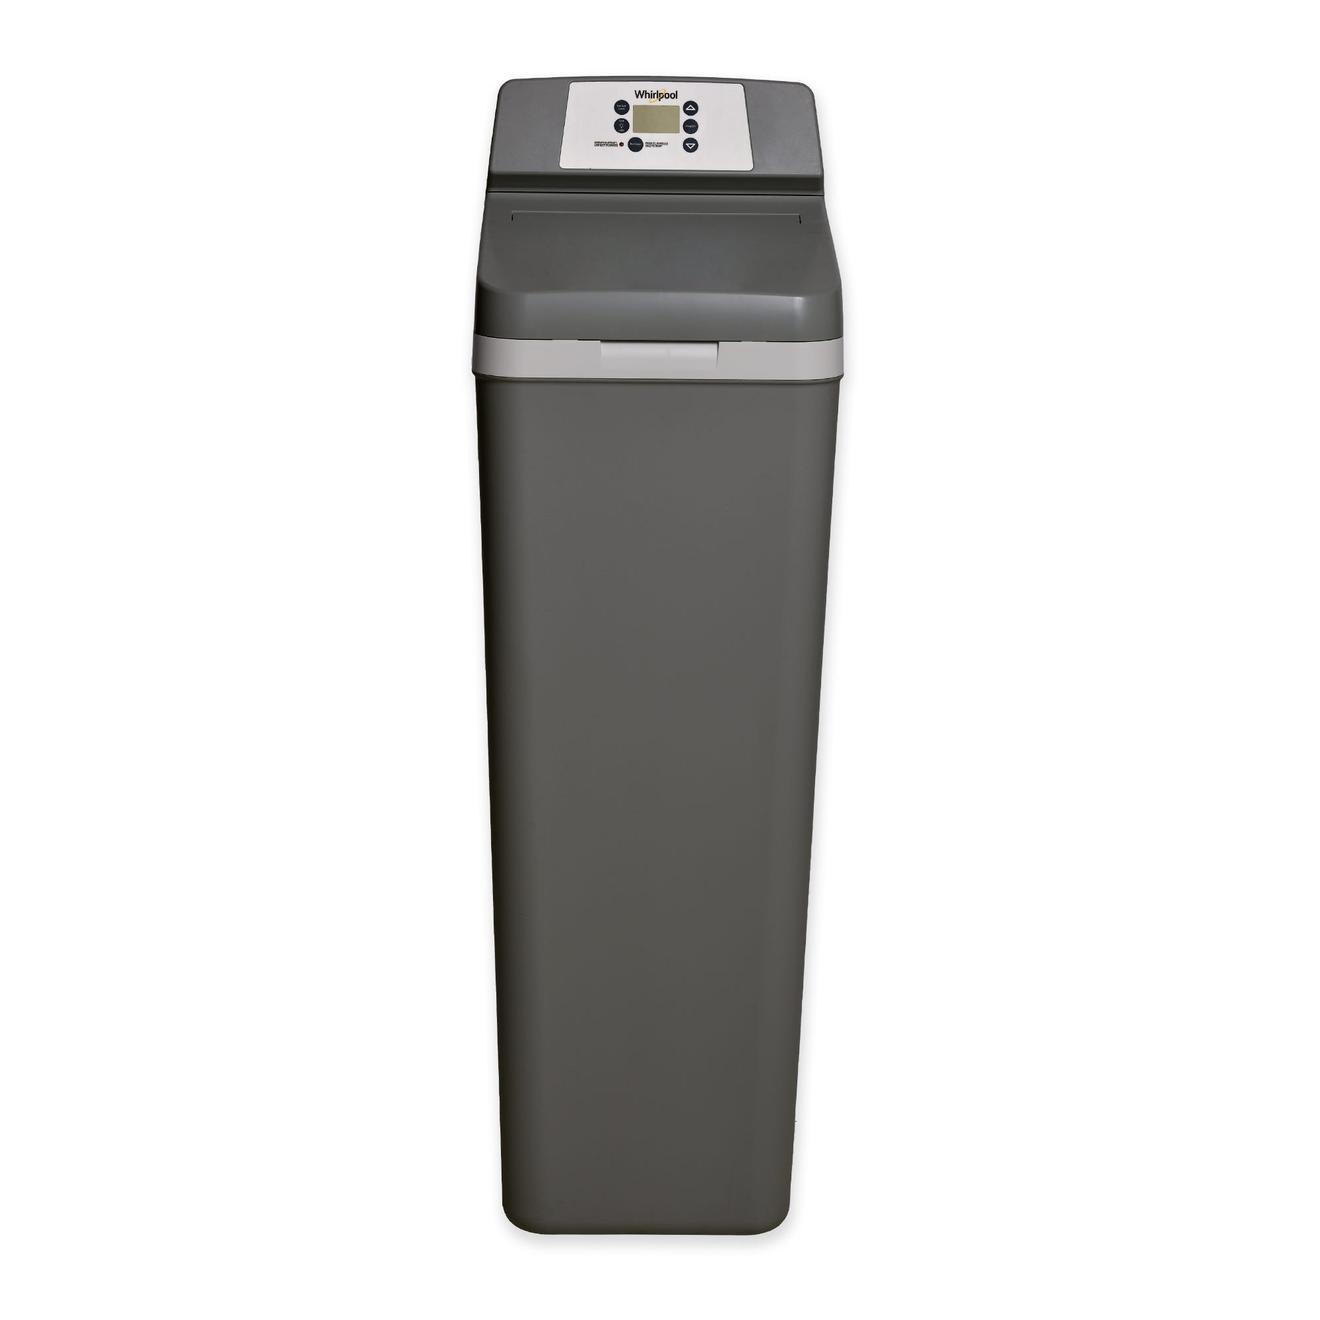 Whirlpool Water Softener offers at $1074.98 in Trail Appliances